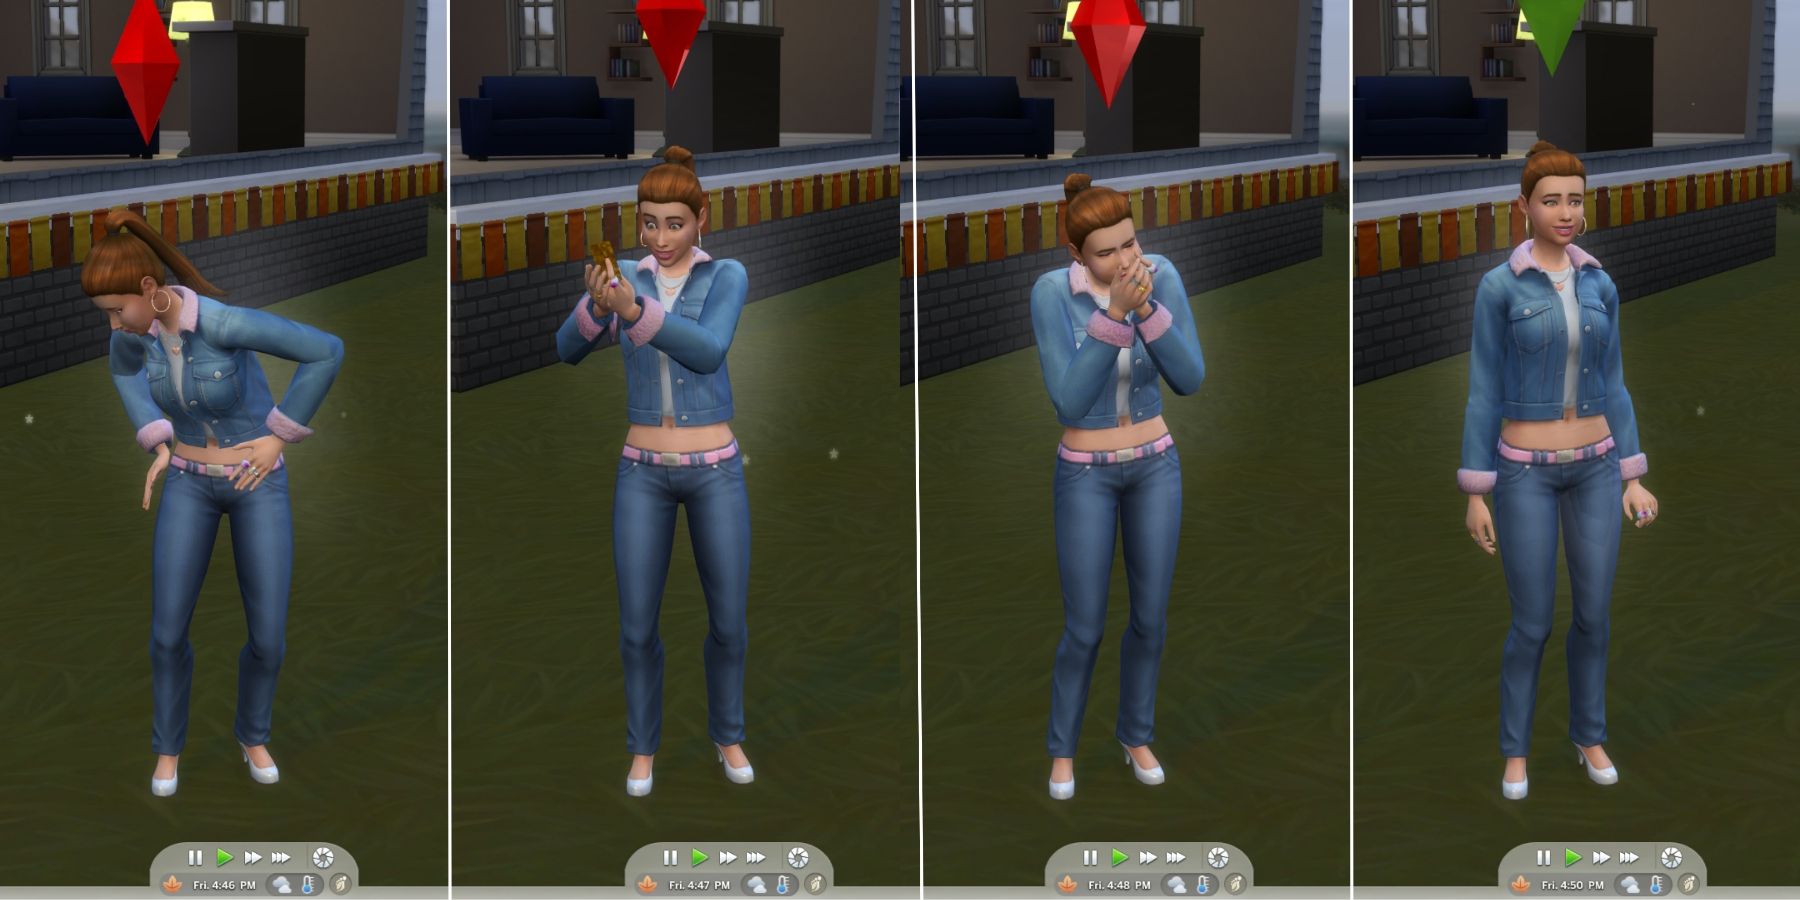 baby Ariel finding food in her pockets in the sims 4